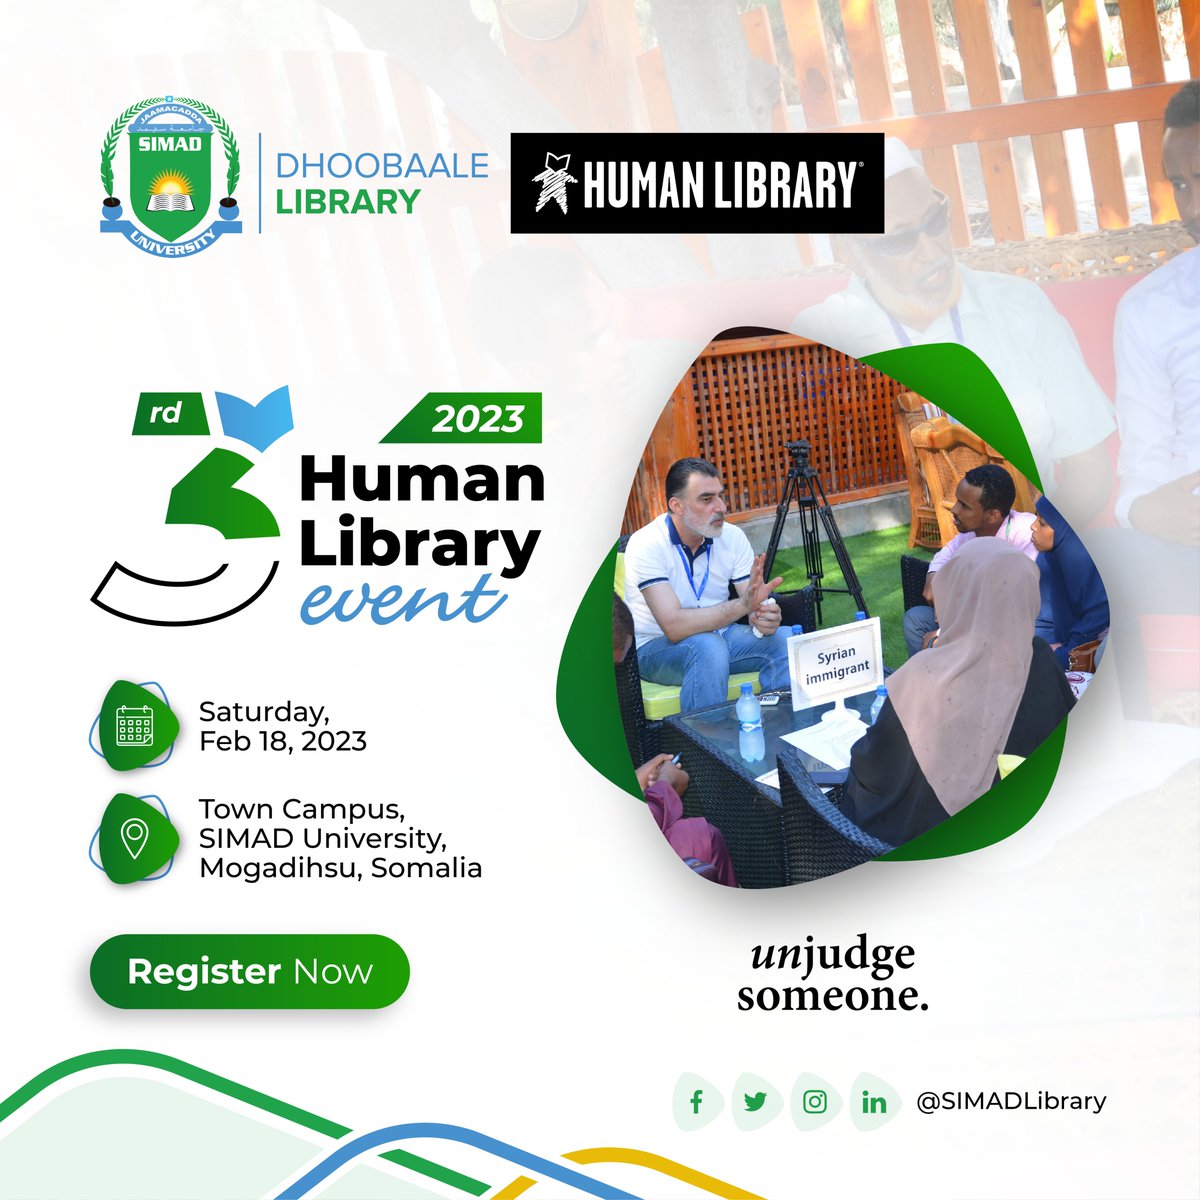 The registration of the #HumanLibrary event is now open. Register NOW to secure your spot of your #humanbook using this link: Bit.ly/HumanLibrary20… #HumanLibrary #unjudgesomeone #RegisterNow